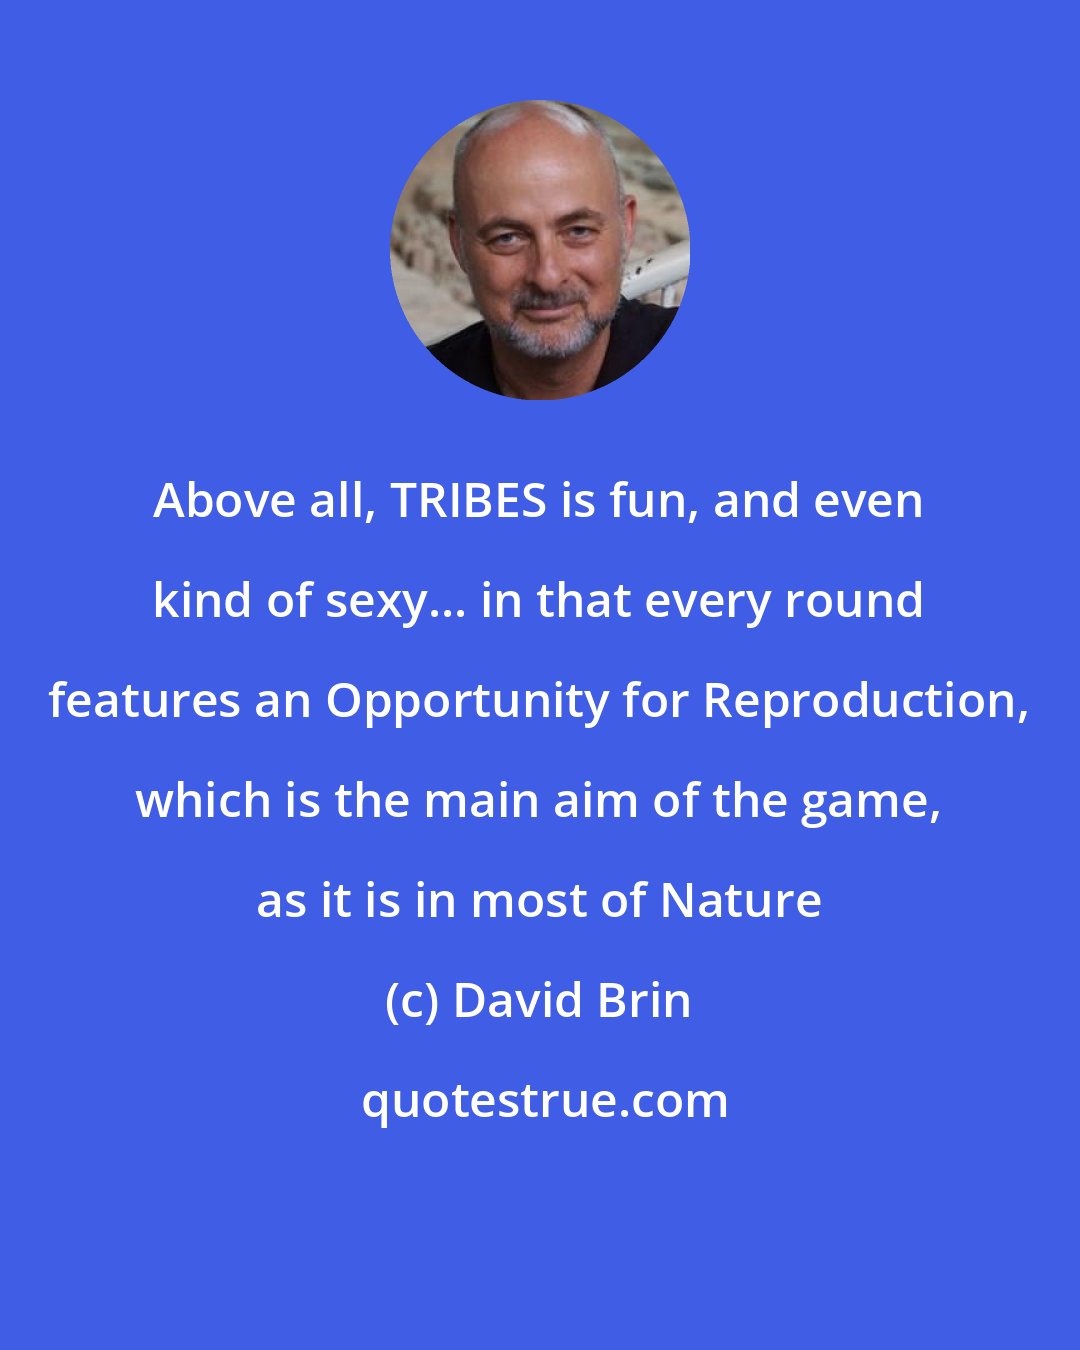 David Brin: Above all, TRIBES is fun, and even kind of sexy... in that every round features an Opportunity for Reproduction, which is the main aim of the game, as it is in most of Nature